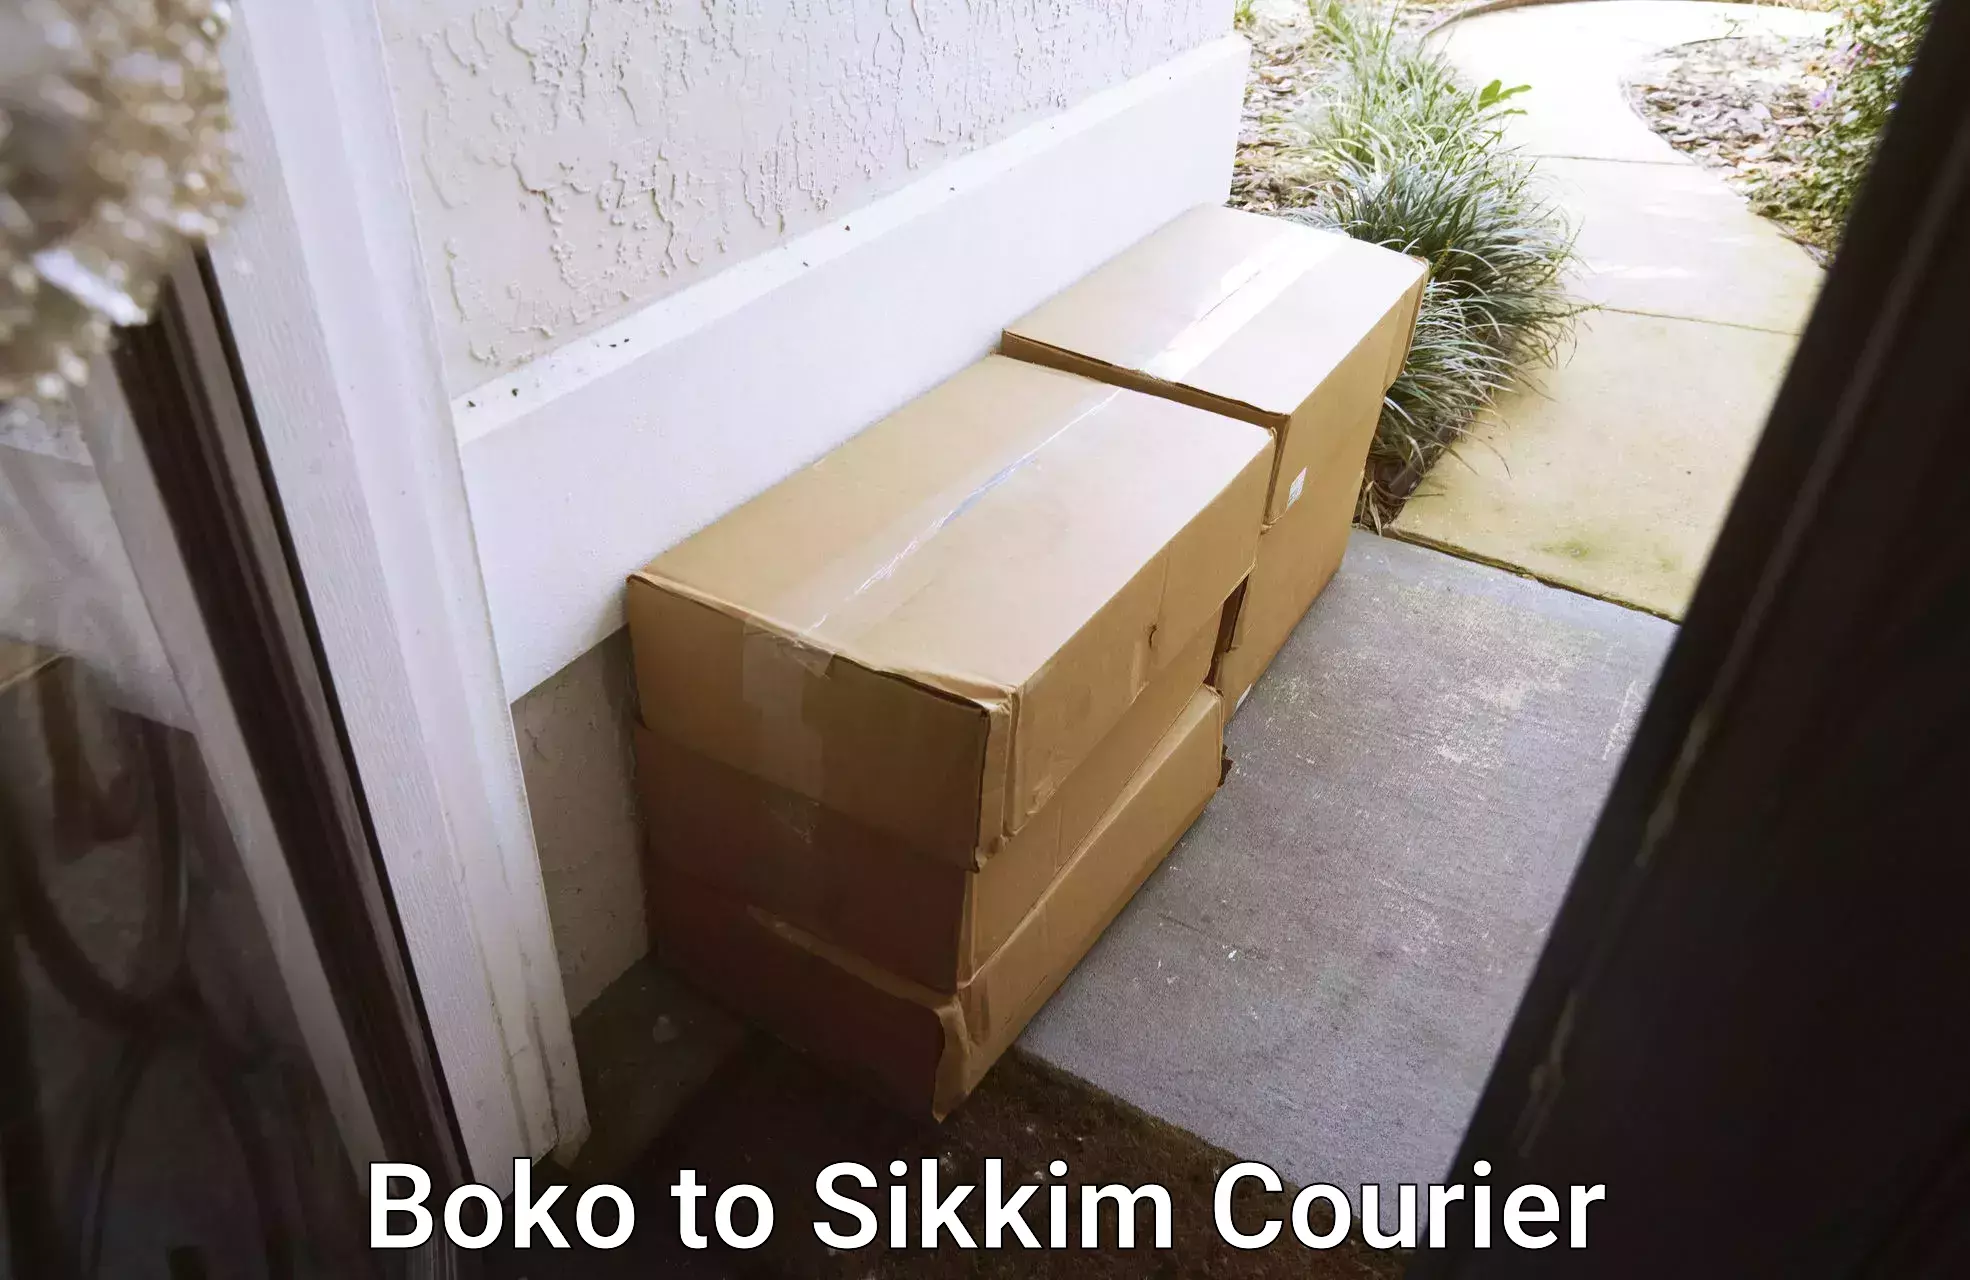 International courier networks Boko to East Sikkim